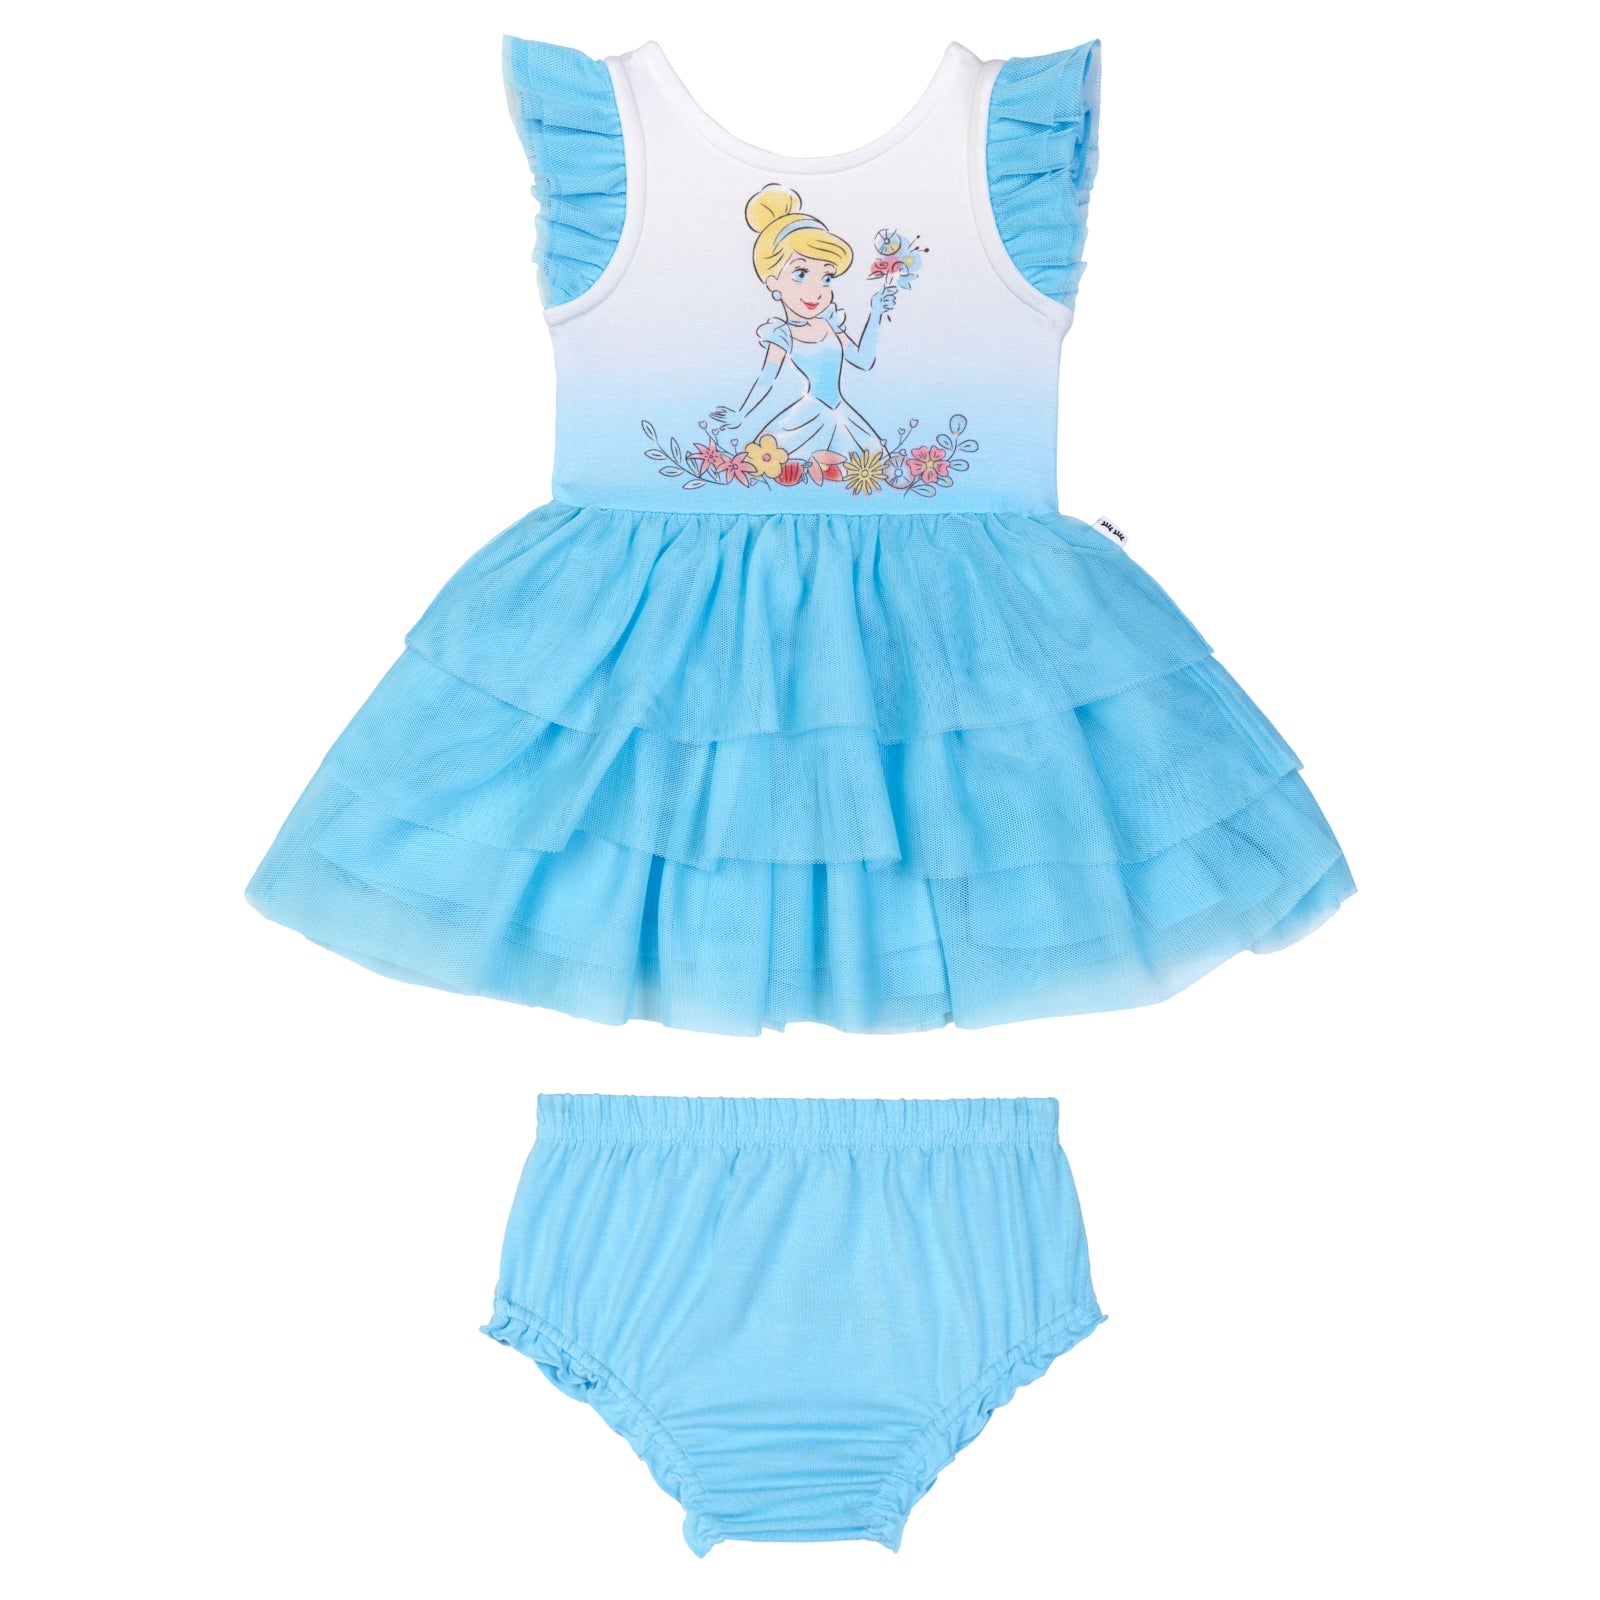 Flat lay image of a Cinderella flutter tiered tutu dress with bloomer